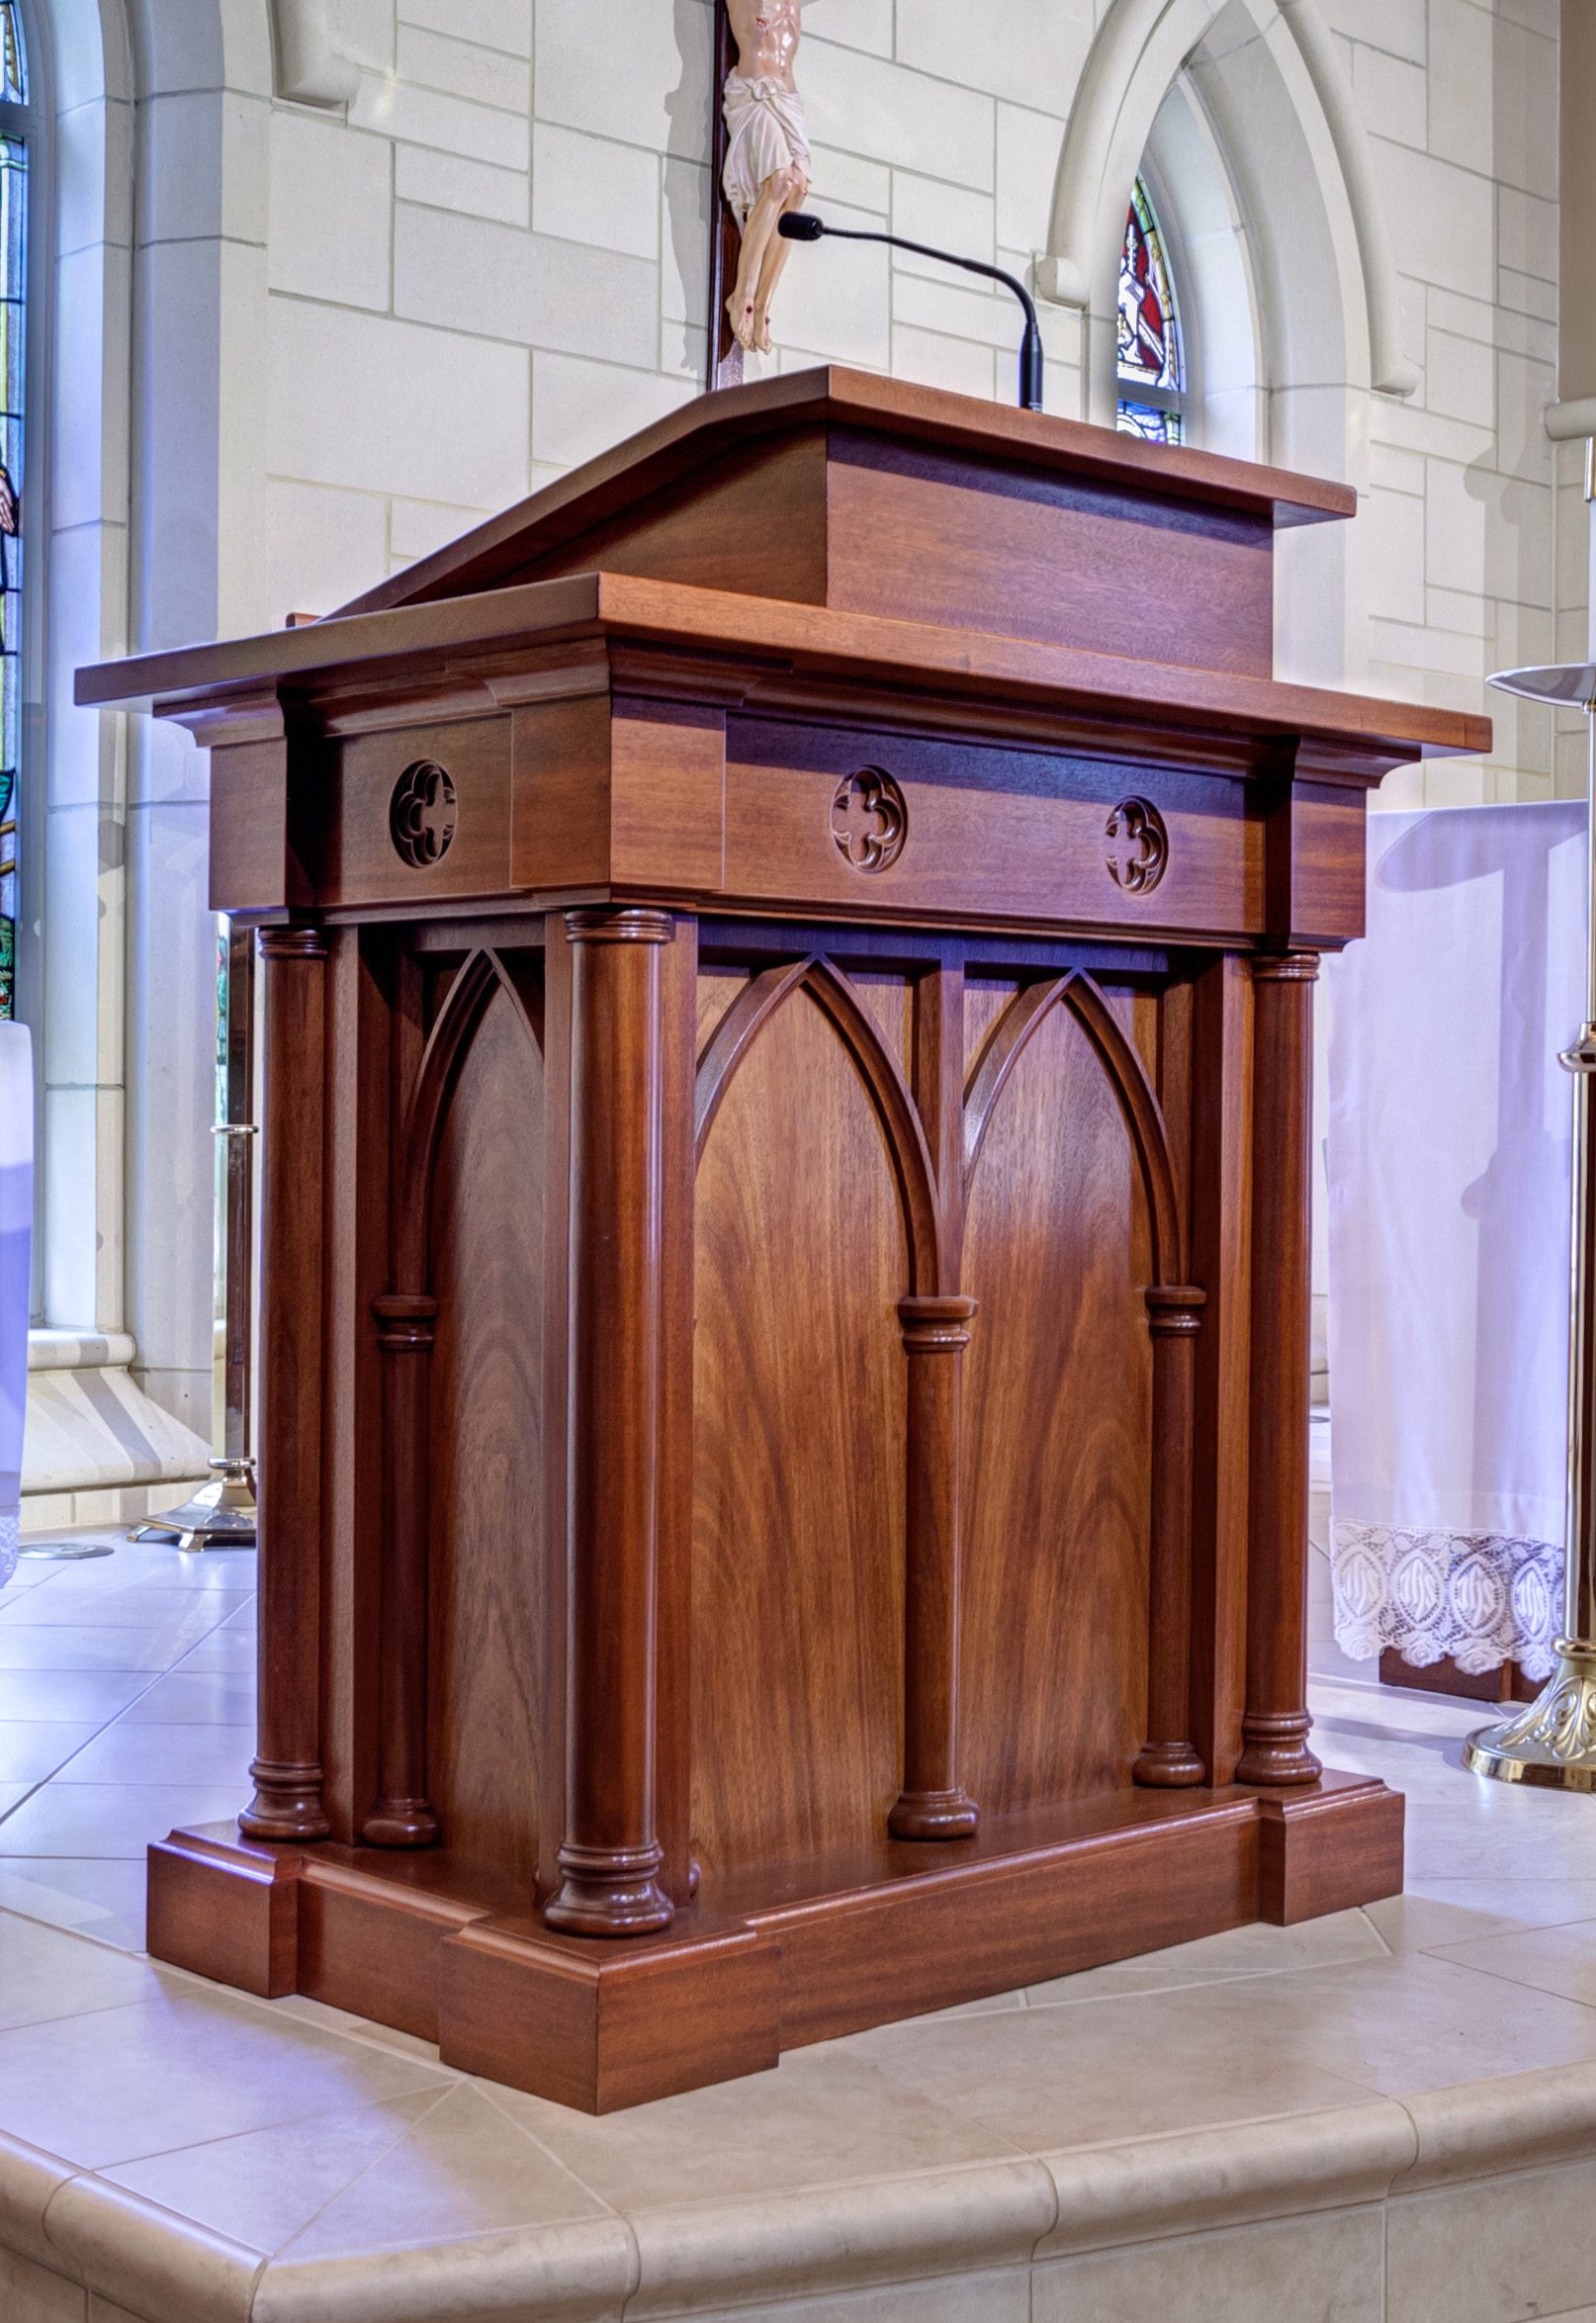 Pulpit St Peter Chanel Roswell GA 